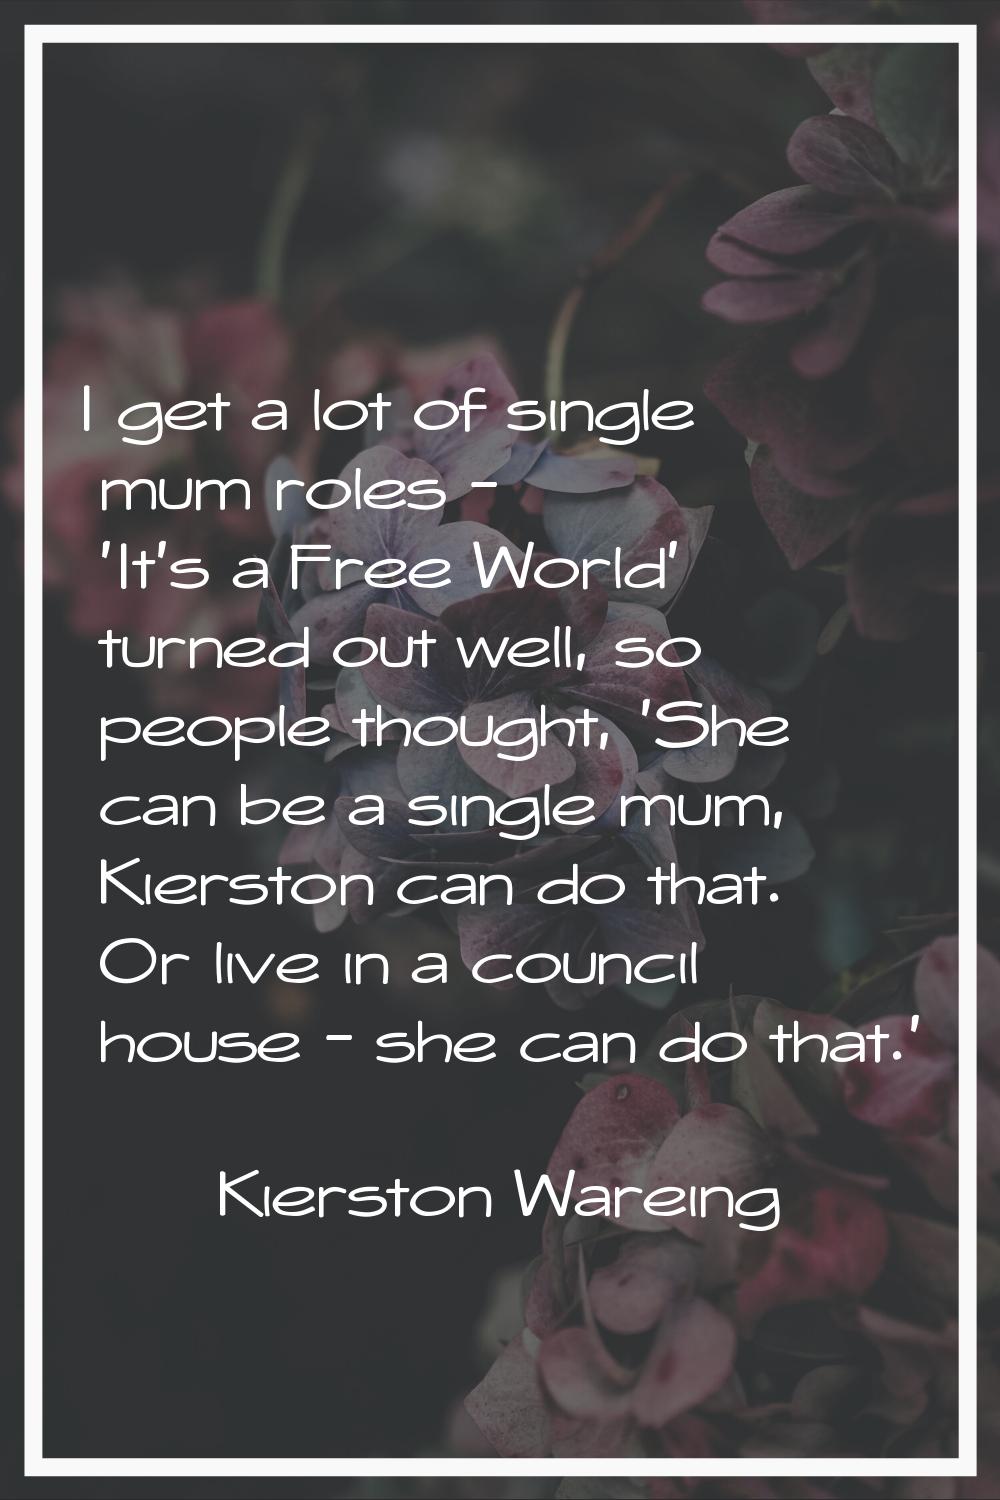 I get a lot of single mum roles - 'It's a Free World' turned out well, so people thought, 'She can 